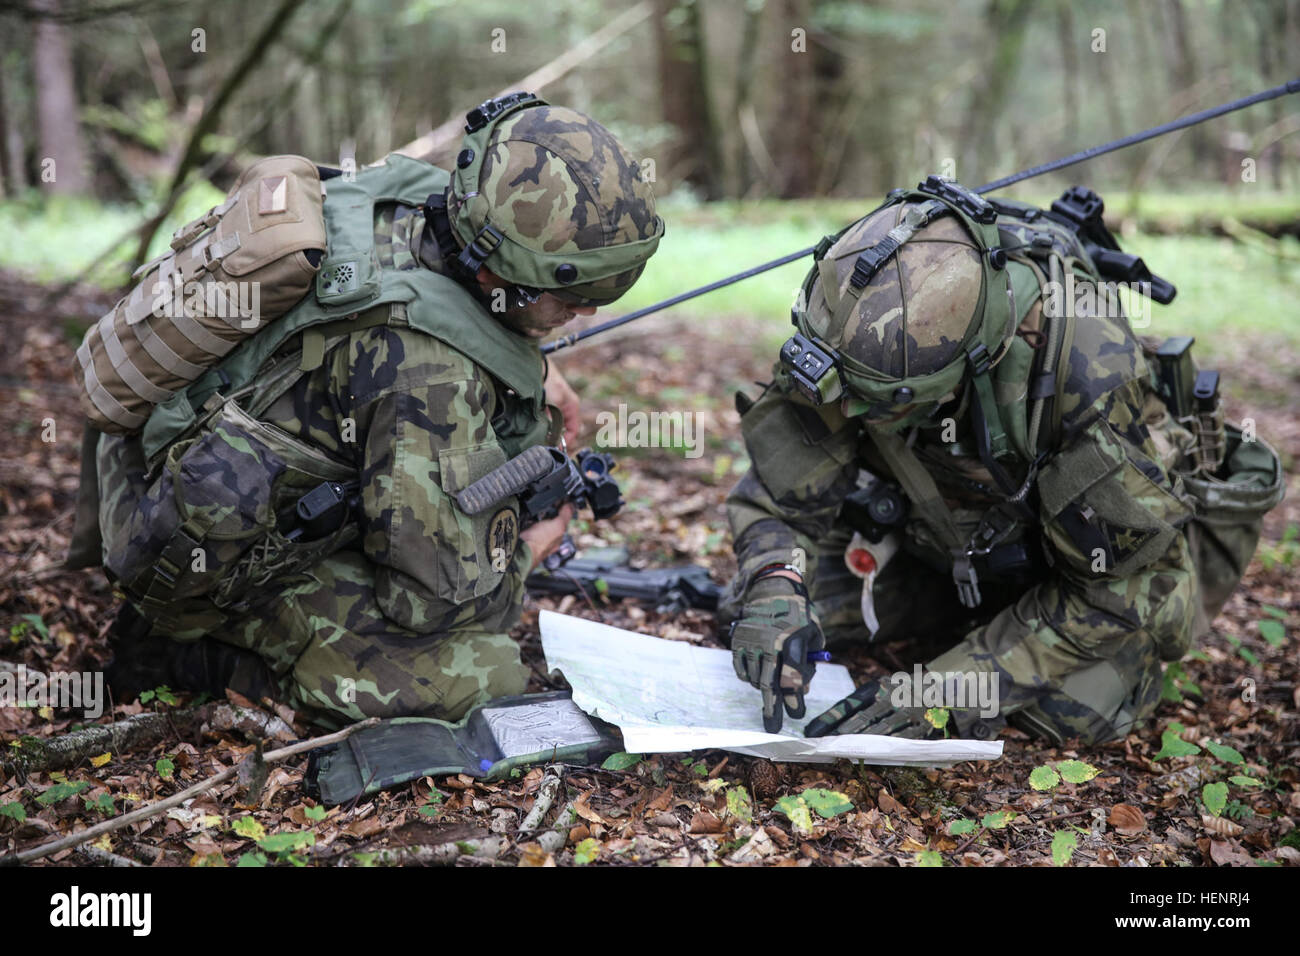 Czech soldiers of 41st Mechanized Battalion, 4th Rapid Deployment Brigade, discuss terrain features while referencing a map during training exercise Saber Junction 2014 at the Joint Multinational Readiness Center in Hohenfels, Germany, Sept. 6, 2014. Saber Junction 2014 prepares U.S., NATO allies and European security partners to conduct unified land operations through the simultaneous combination of offensive, defensive and stability operations appropriate to the mission and the environment. More information about Saber Junction 2014 can be found at http://www.eur.army.mil/SaberJunction/ (U.S Stock Photo